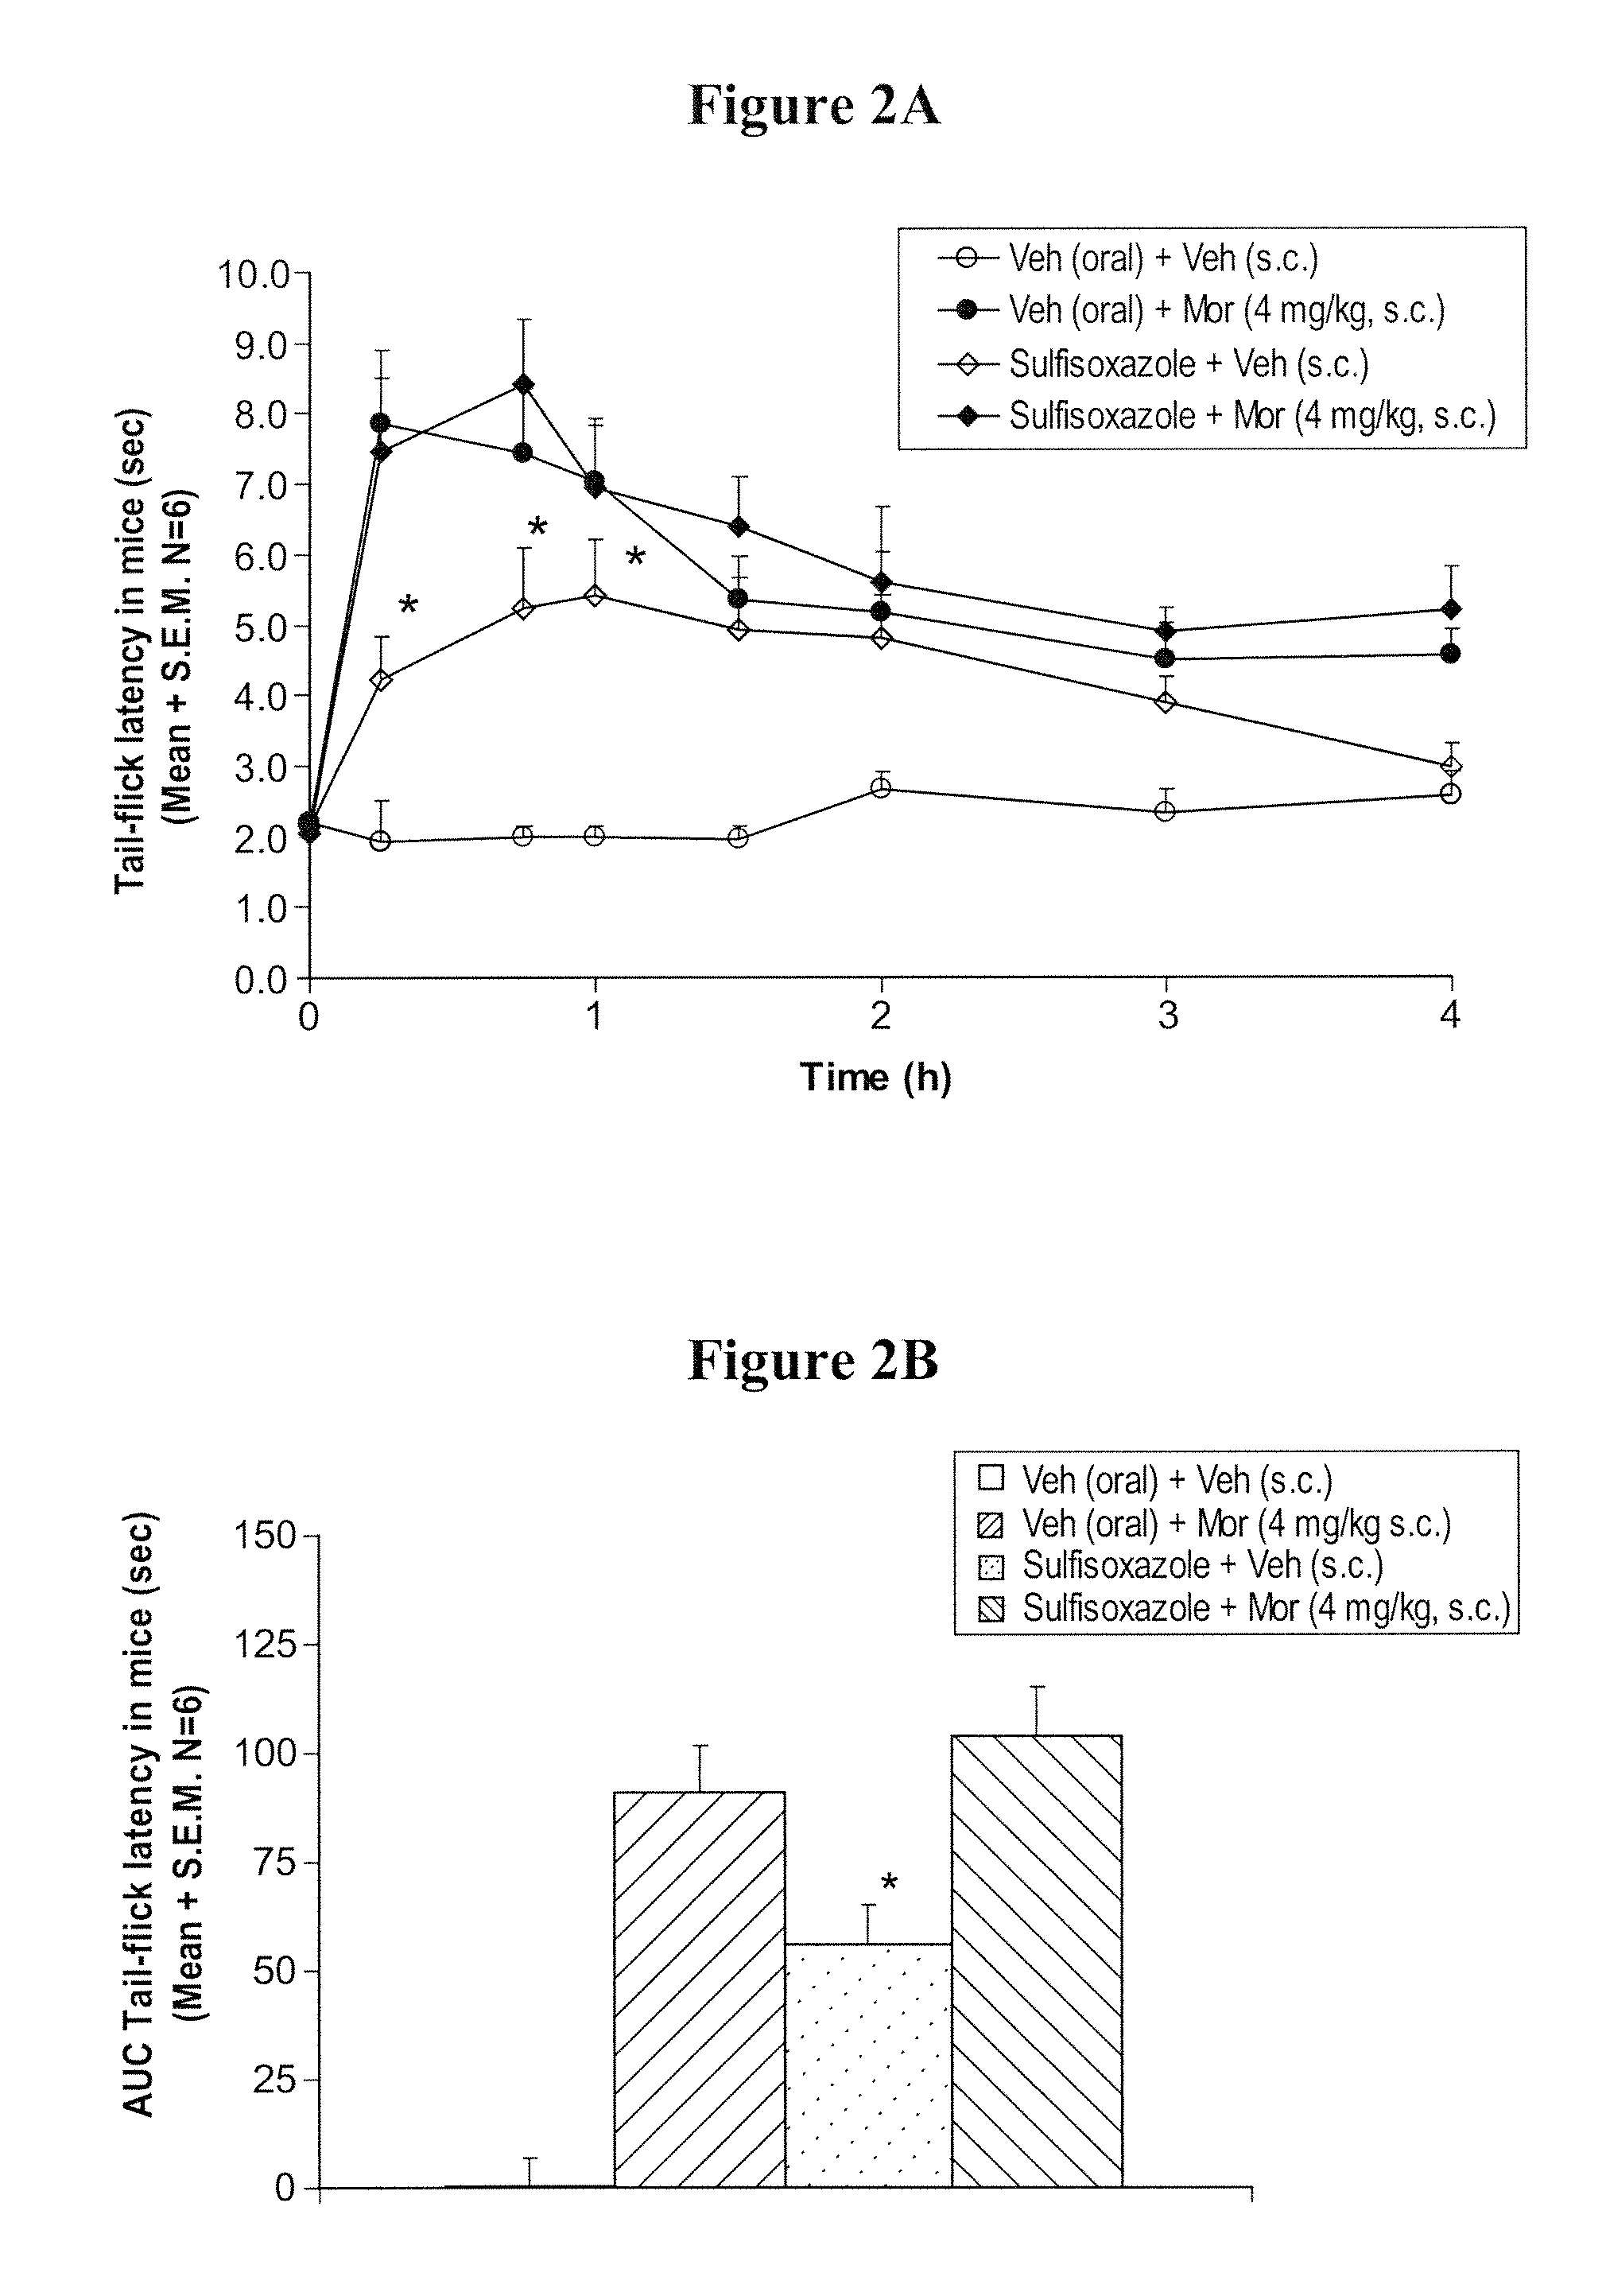 Methods to Treat Pain Using an Alpha-2 Adrenergic Agonist and an Endothelin Antagonist